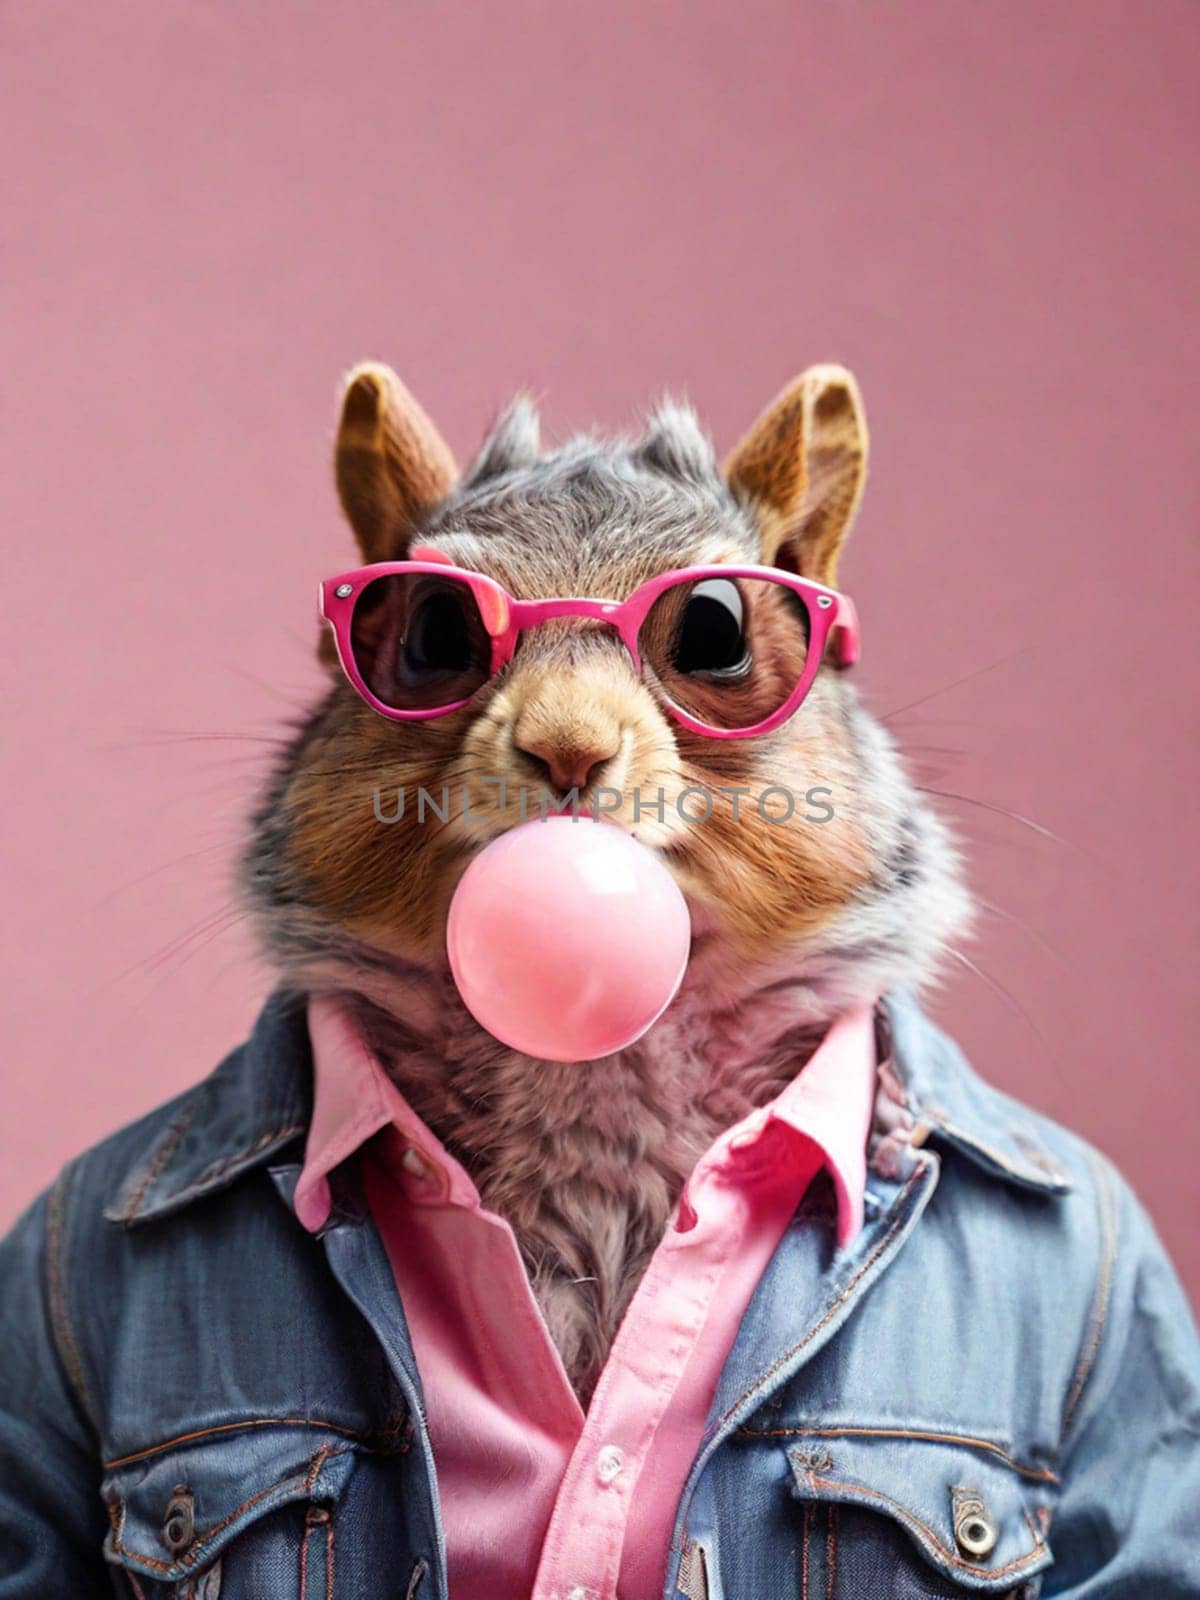 A funny squirrel in a denim jacket and pink sunglasses blows a pink bubble from bubble gum